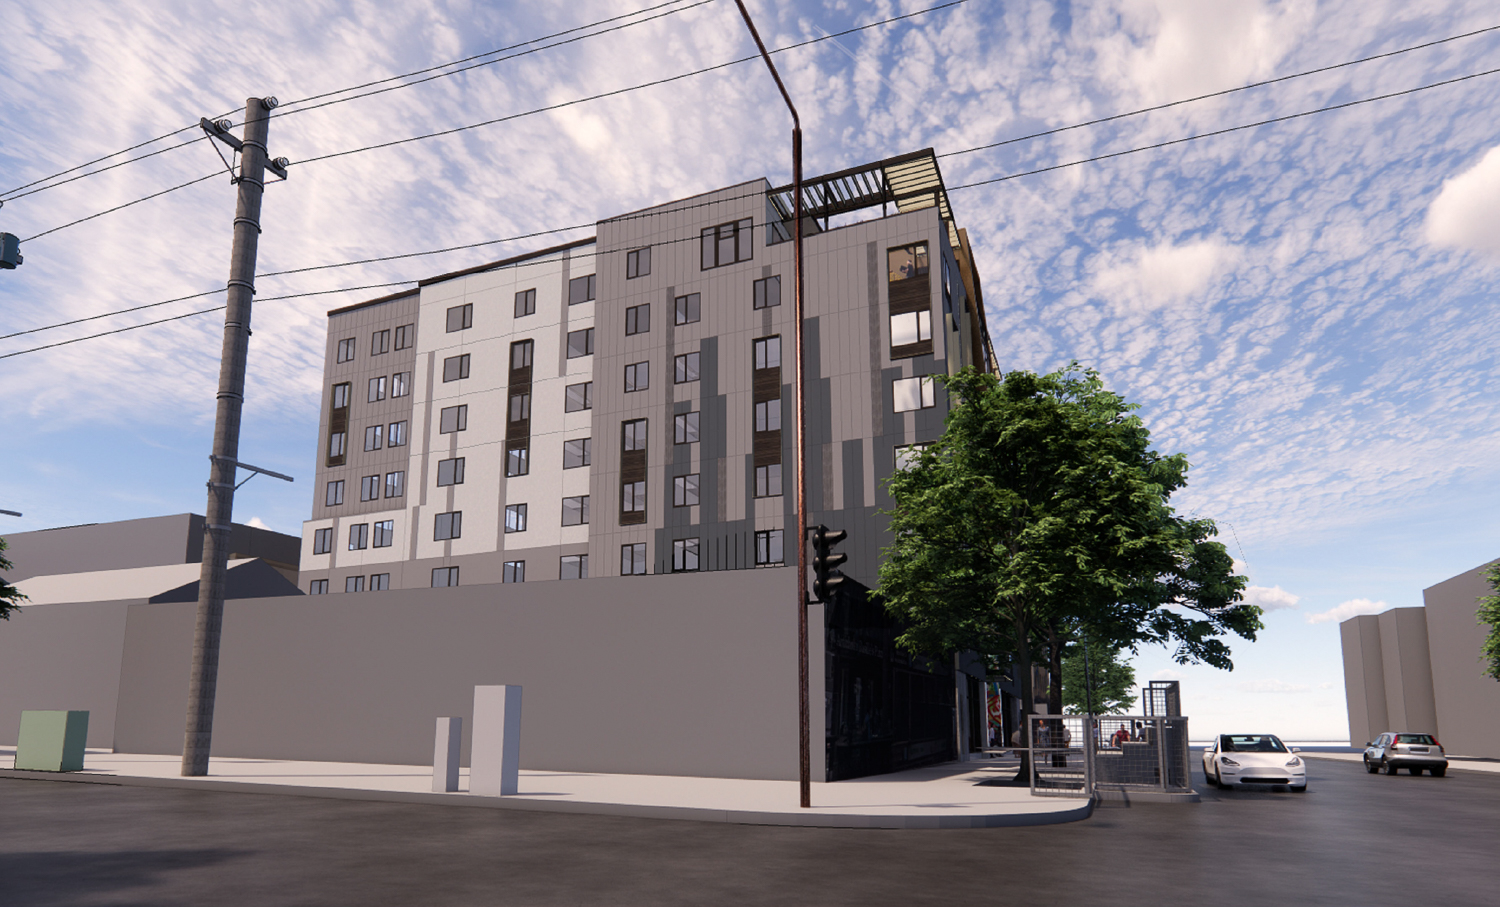 2538 Durant Avenue view from Bowditch Street, rendering by Studio KDA